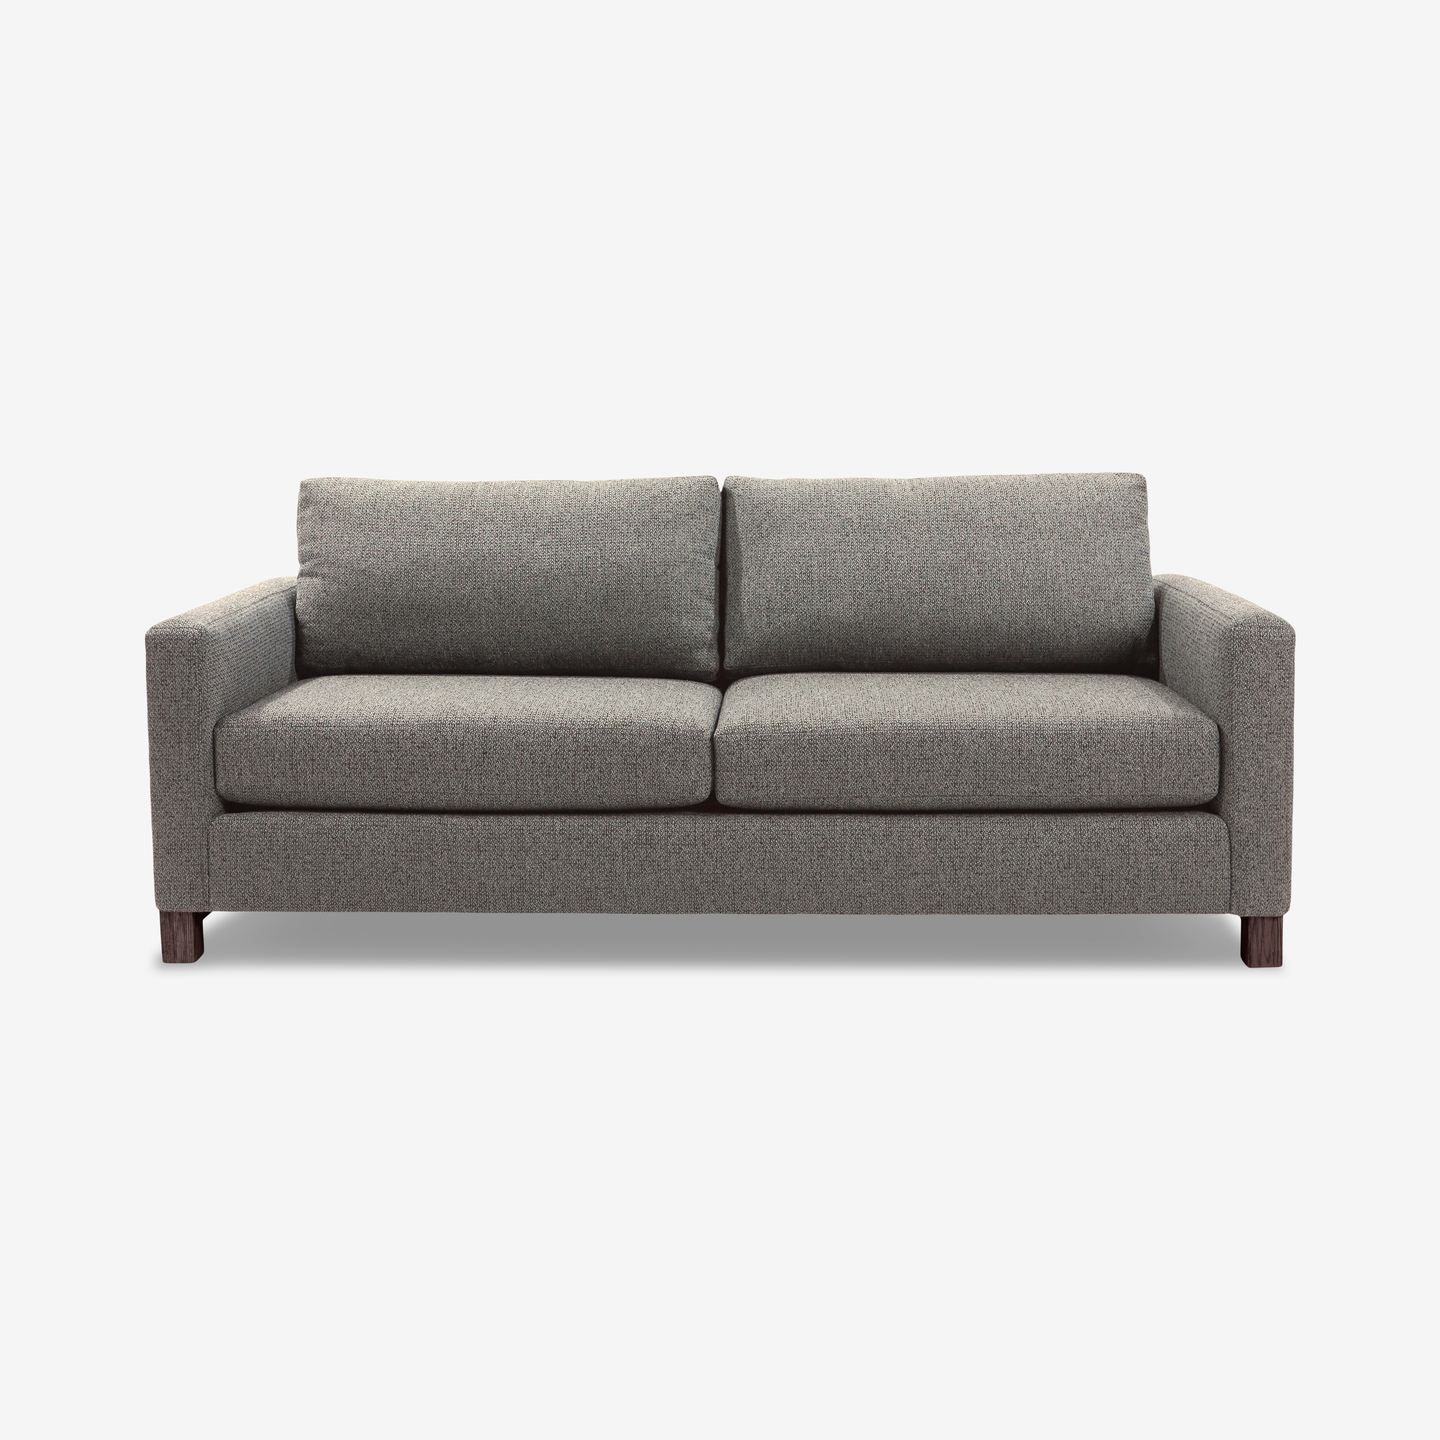 re_1344_Quincy-Sofa-Gray-Non-Tufted_Front_2021